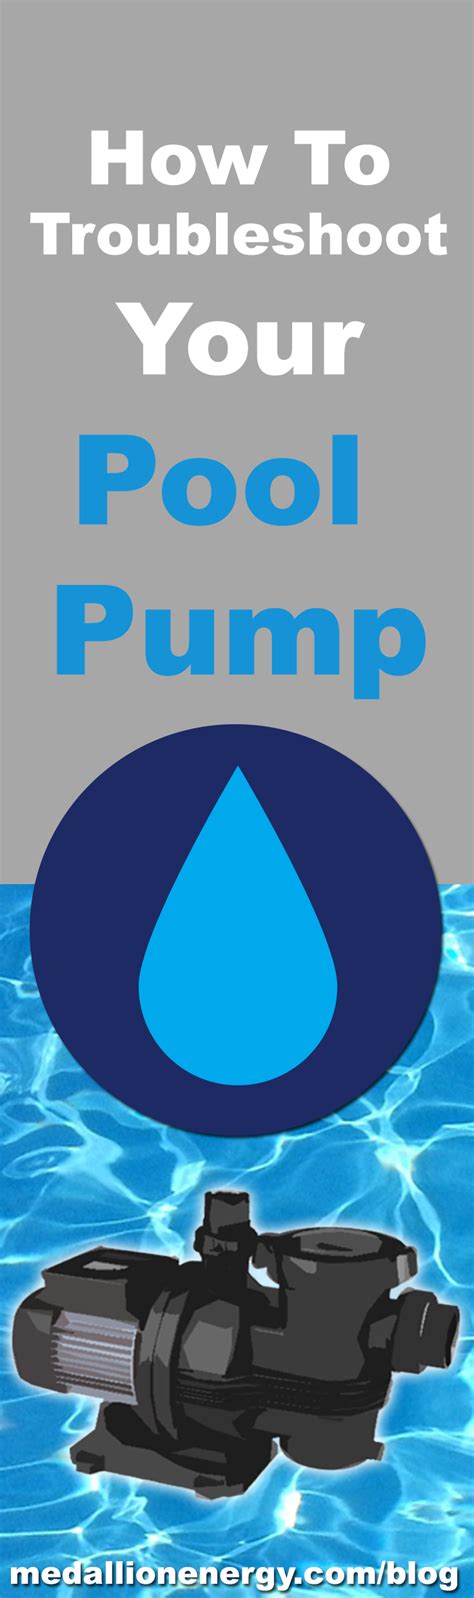 Troubleshooting Guide For Your Pool Pump